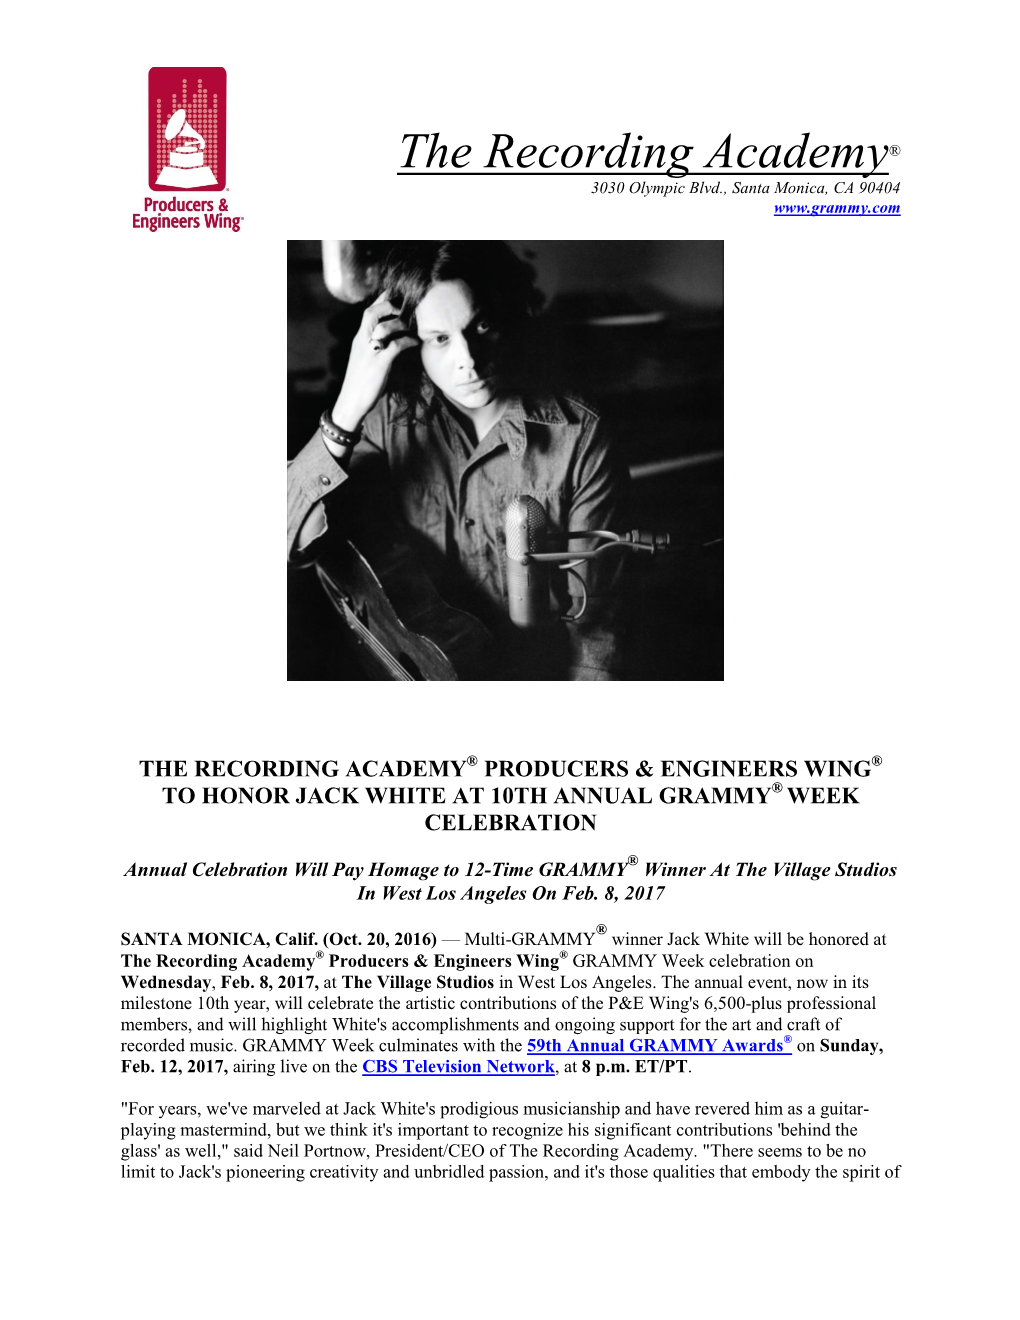 The Recording Academy® Producers & Engineers Wing® to Honor Jack White at 10Th Annual Grammy® Week Celebration